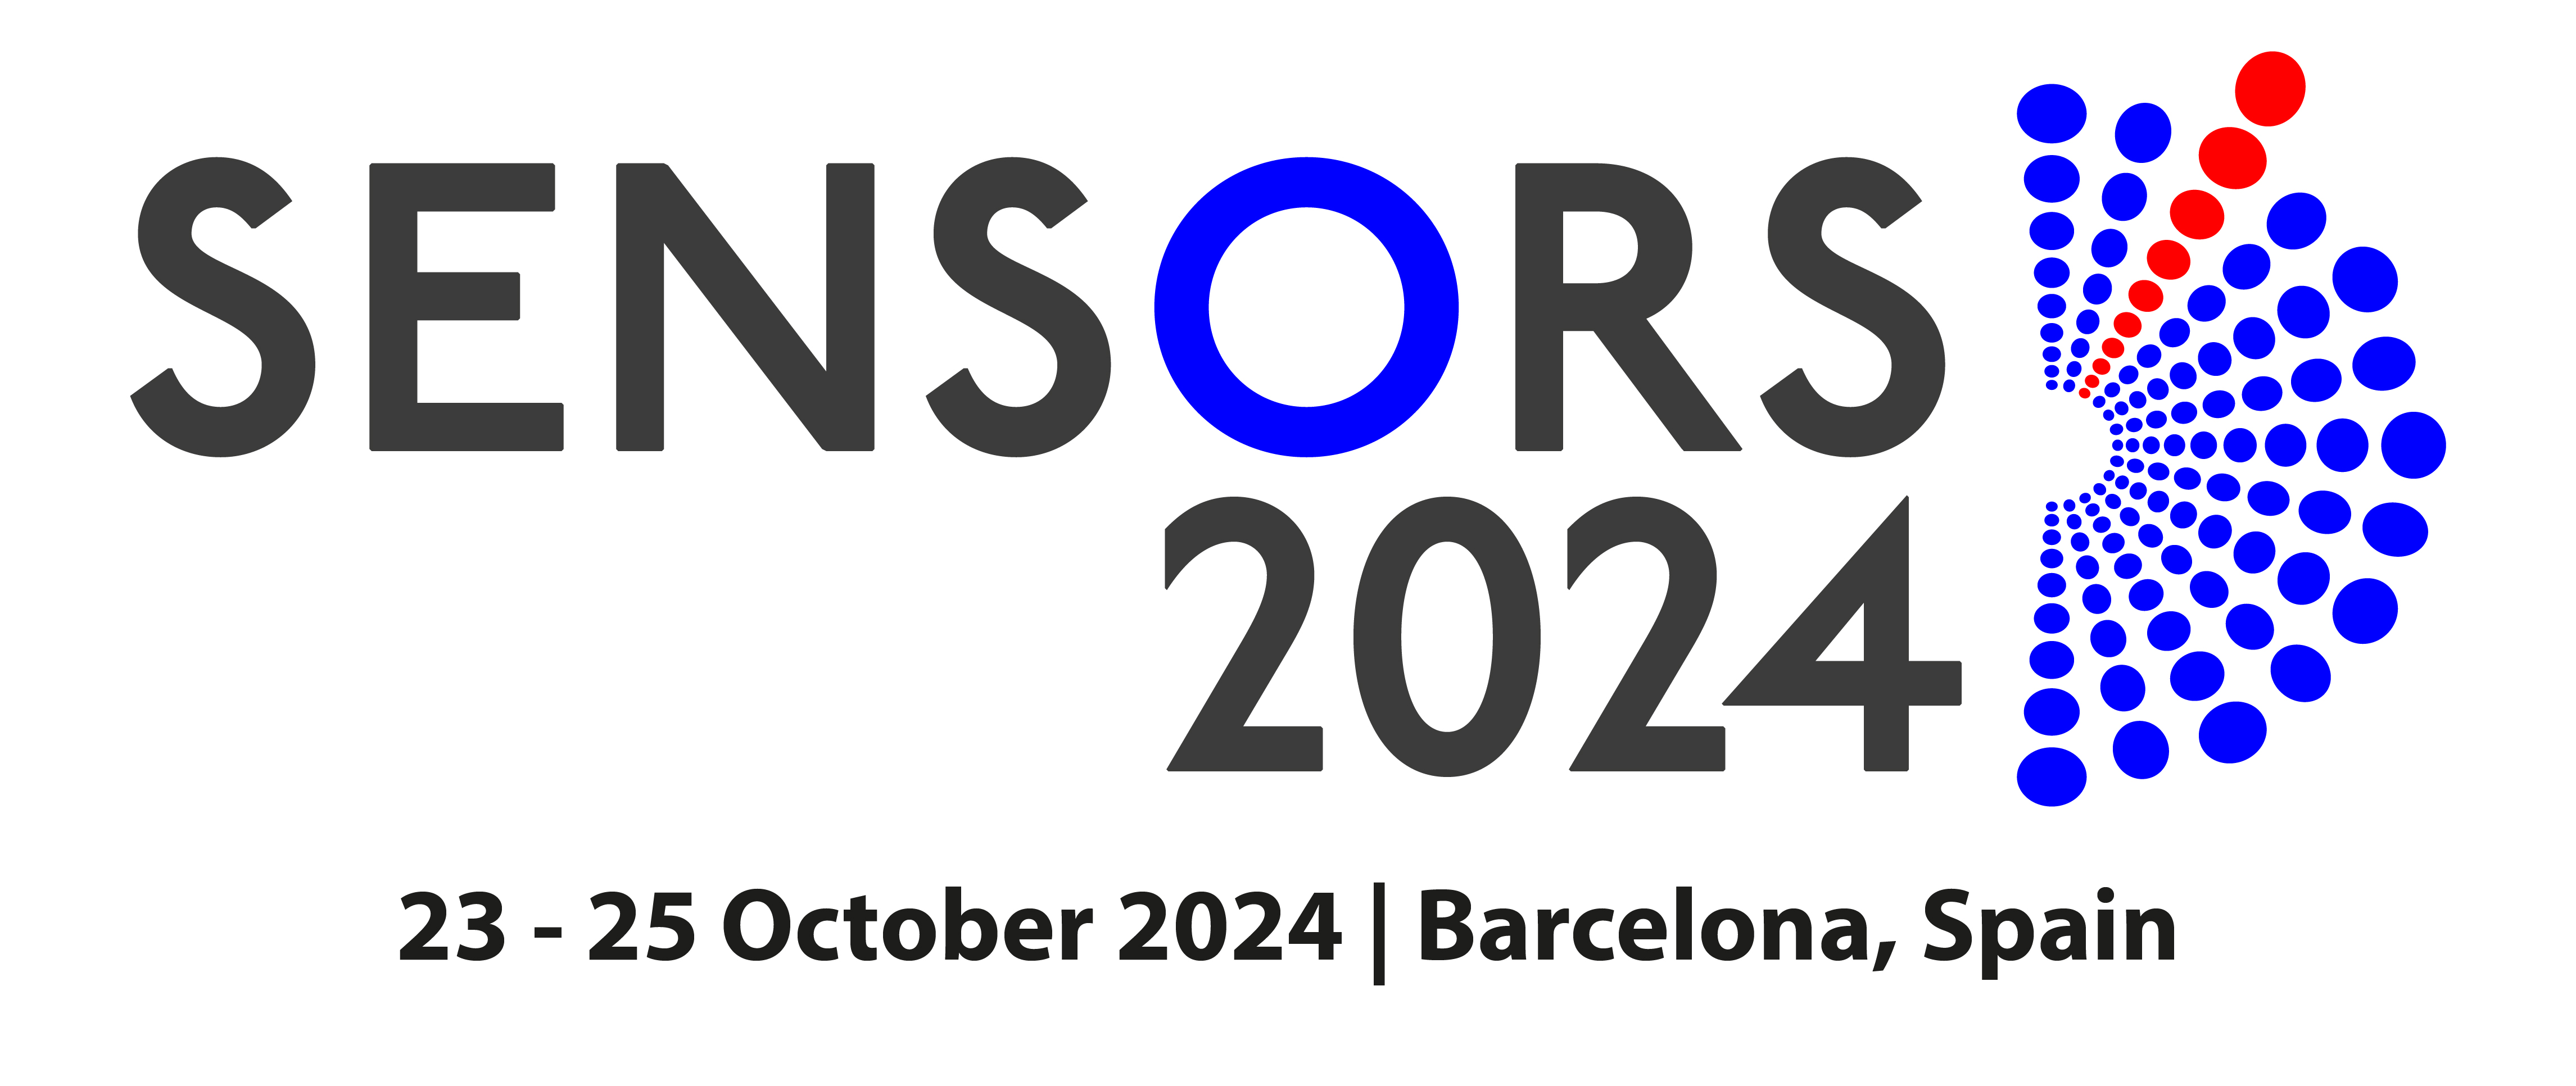 The 4th edition of the Sensors Technologies International conference - Sensors 2024